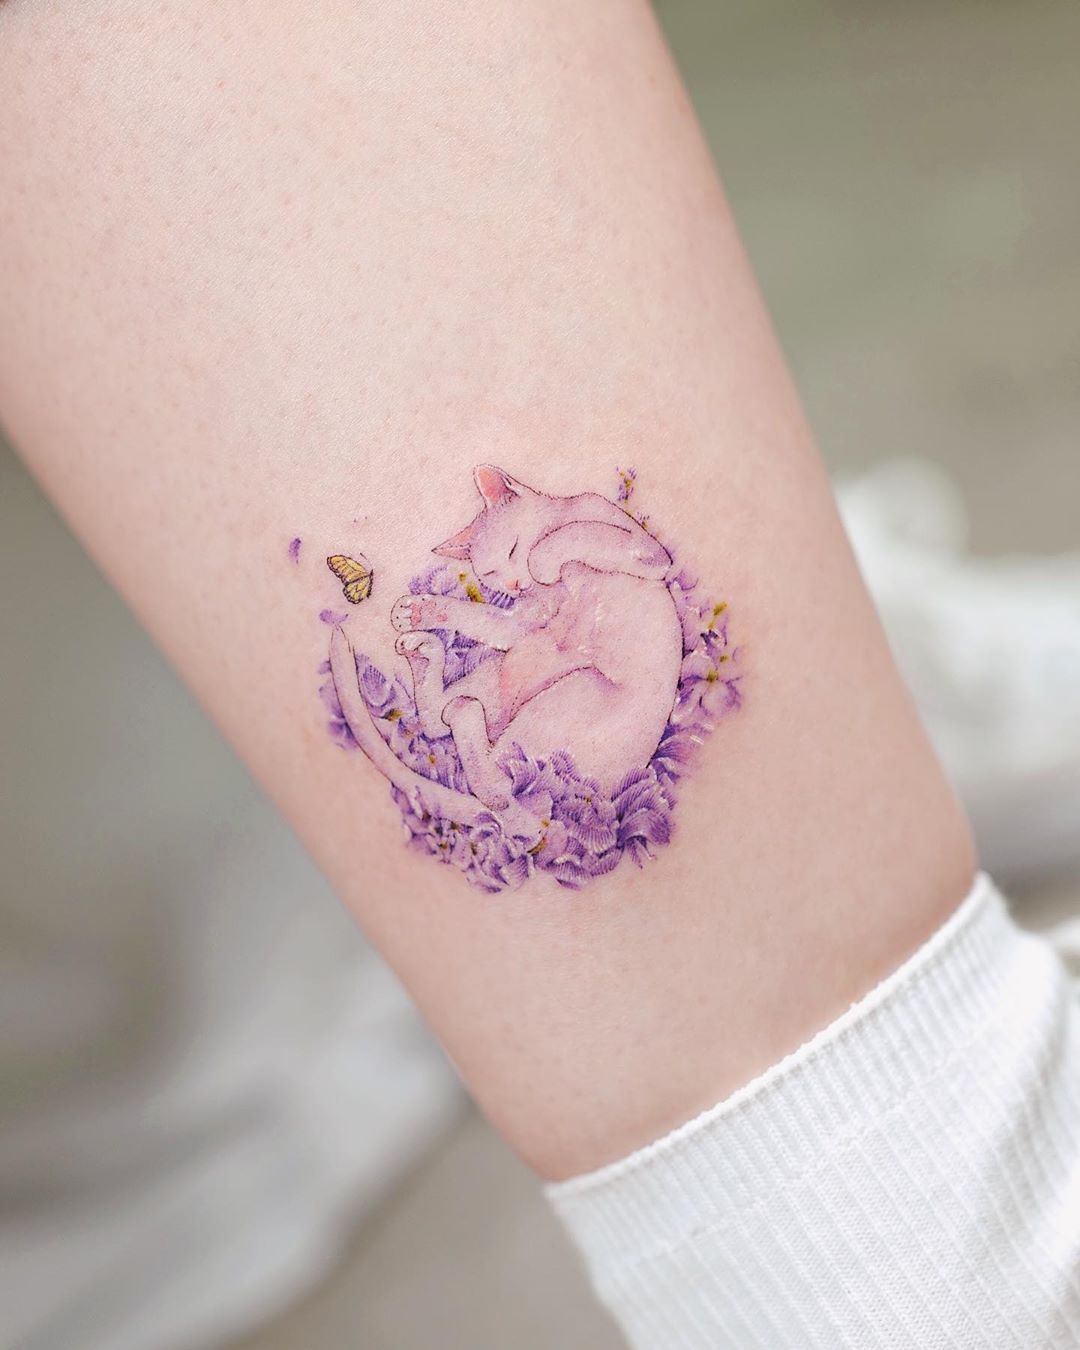 Chris Donnelly Tattoos - Little #lavender #ankle #tattoo love these little  delicate pieces #3rl #linework #linetattoo #ankletattoo #dynamicink  #fusionink | Facebook